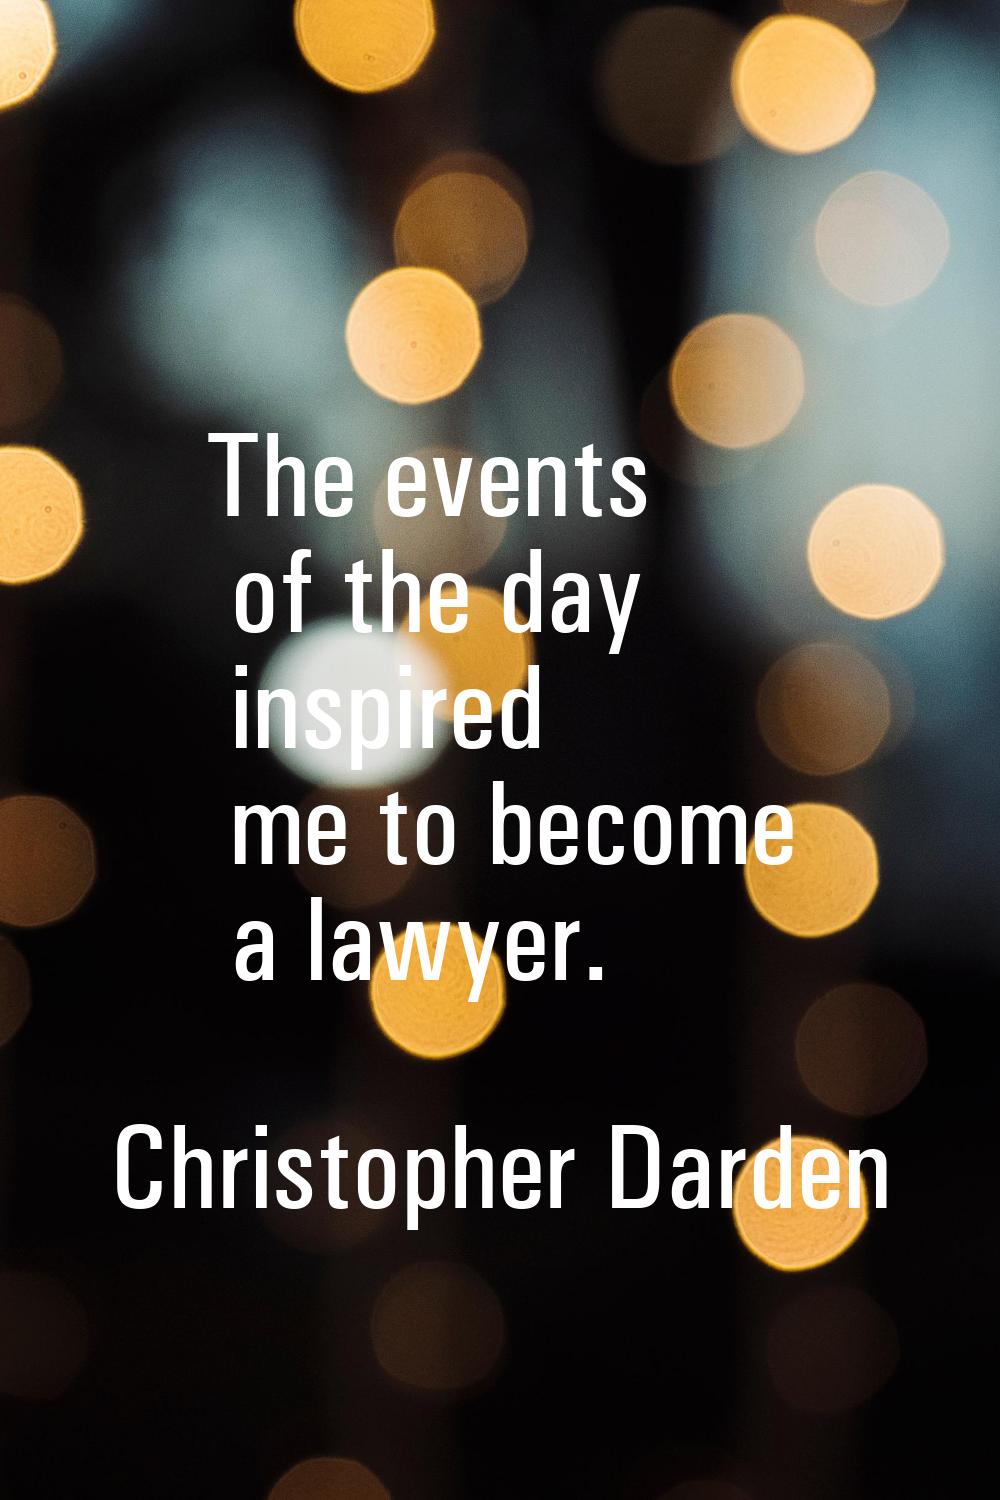 The events of the day inspired me to become a lawyer.